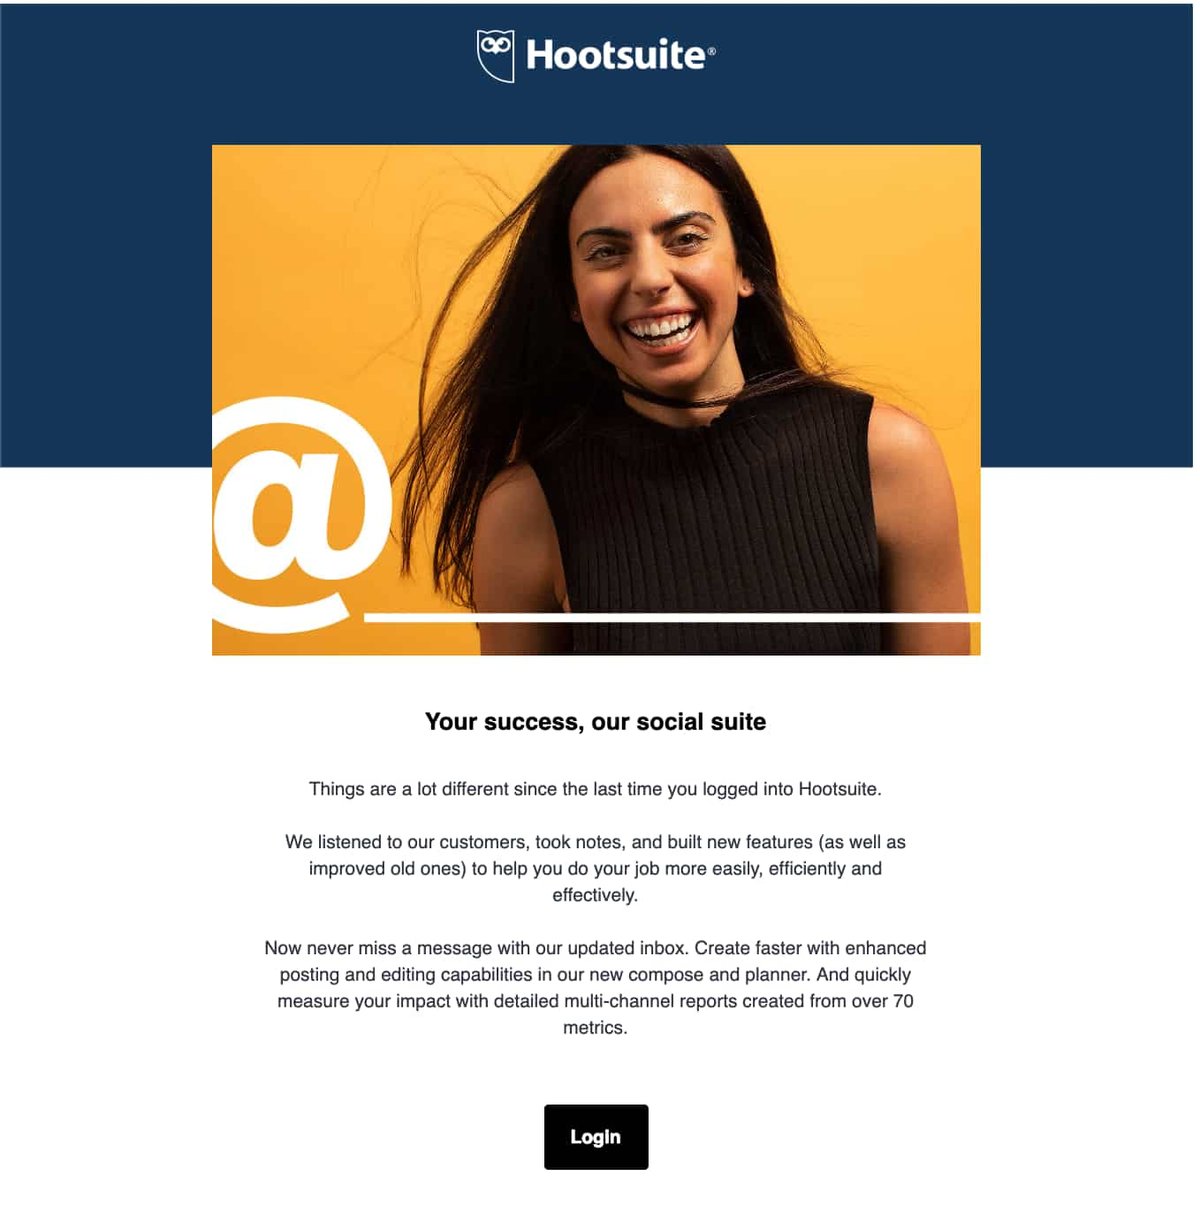 Hootsuite re-engagement email example